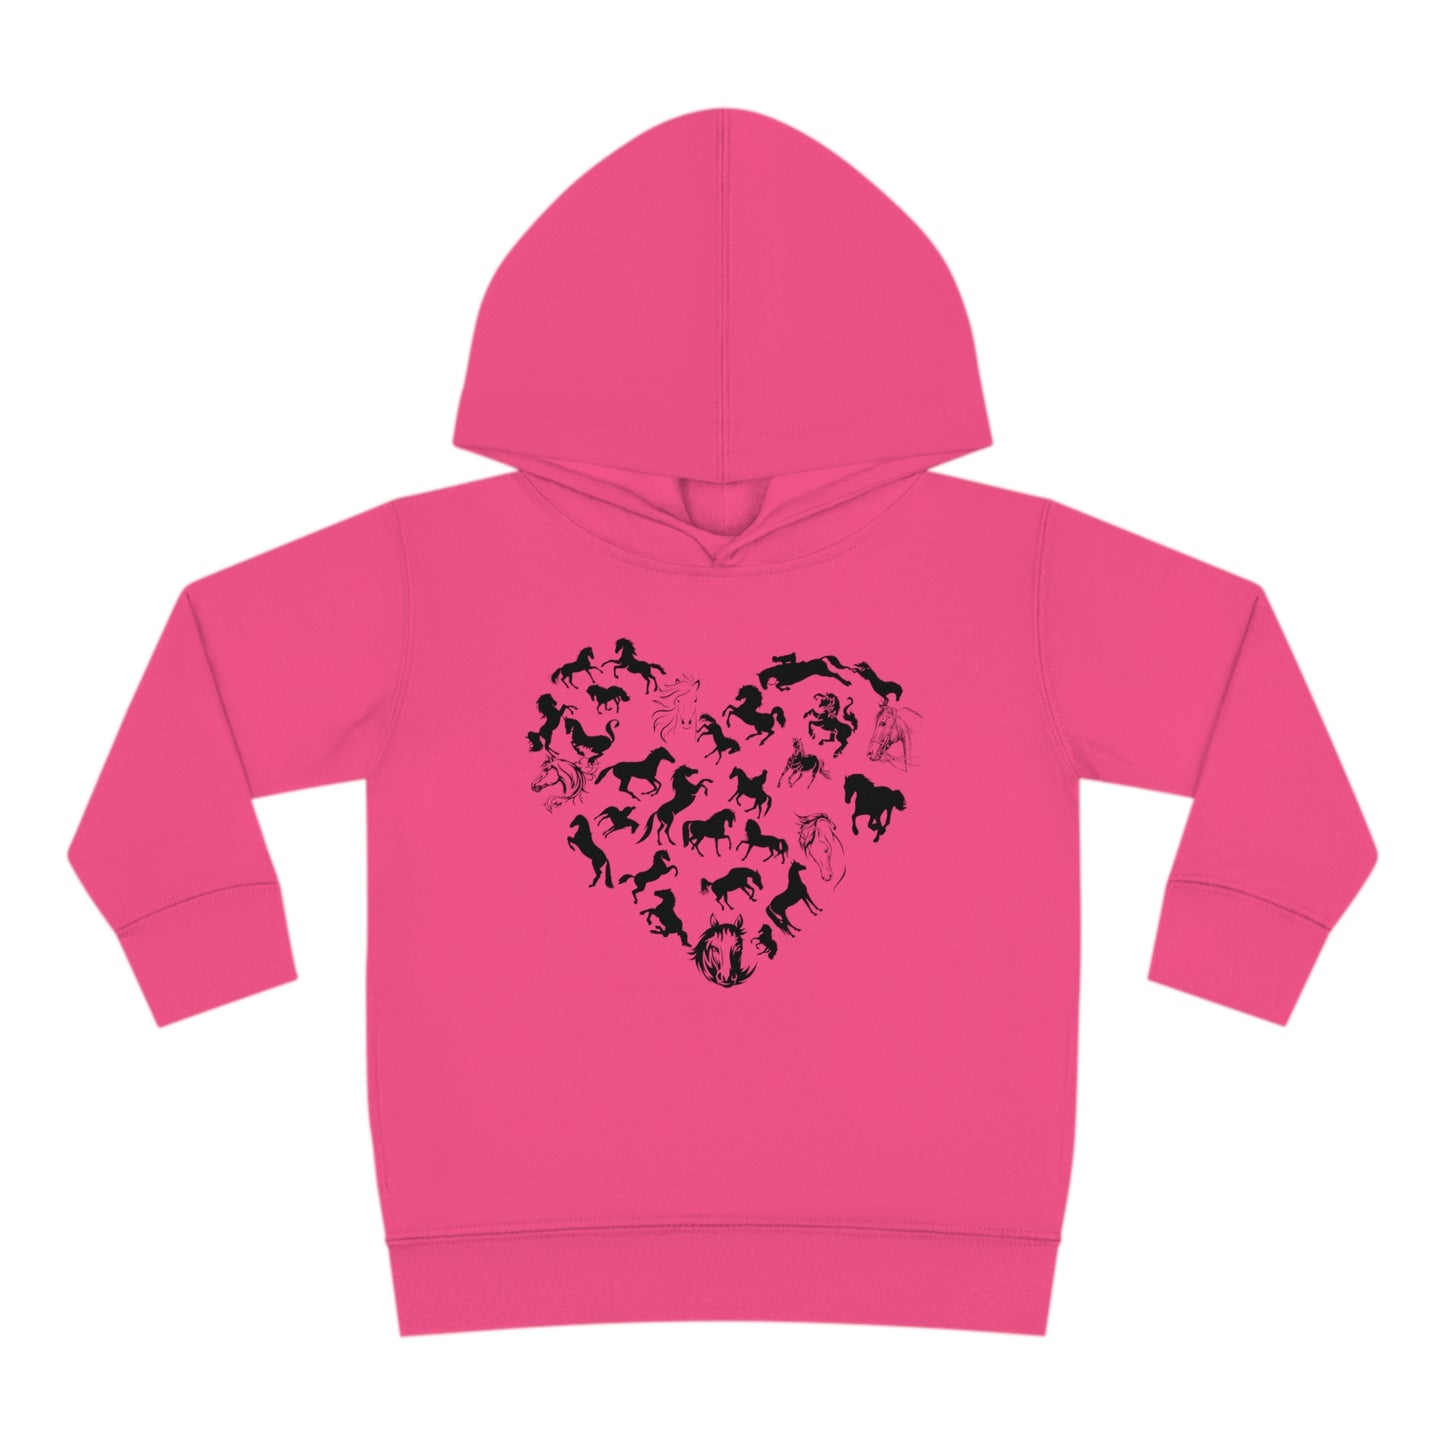 Horse Heart Hoodie | Horse Lover Tee - Horses Heart Toddler - Horse Lover Gift - Horse Toddler Shirt - Equestrian Tee - Gift for Horse Owner Kids clothes Vintage Hot Pink 2T 